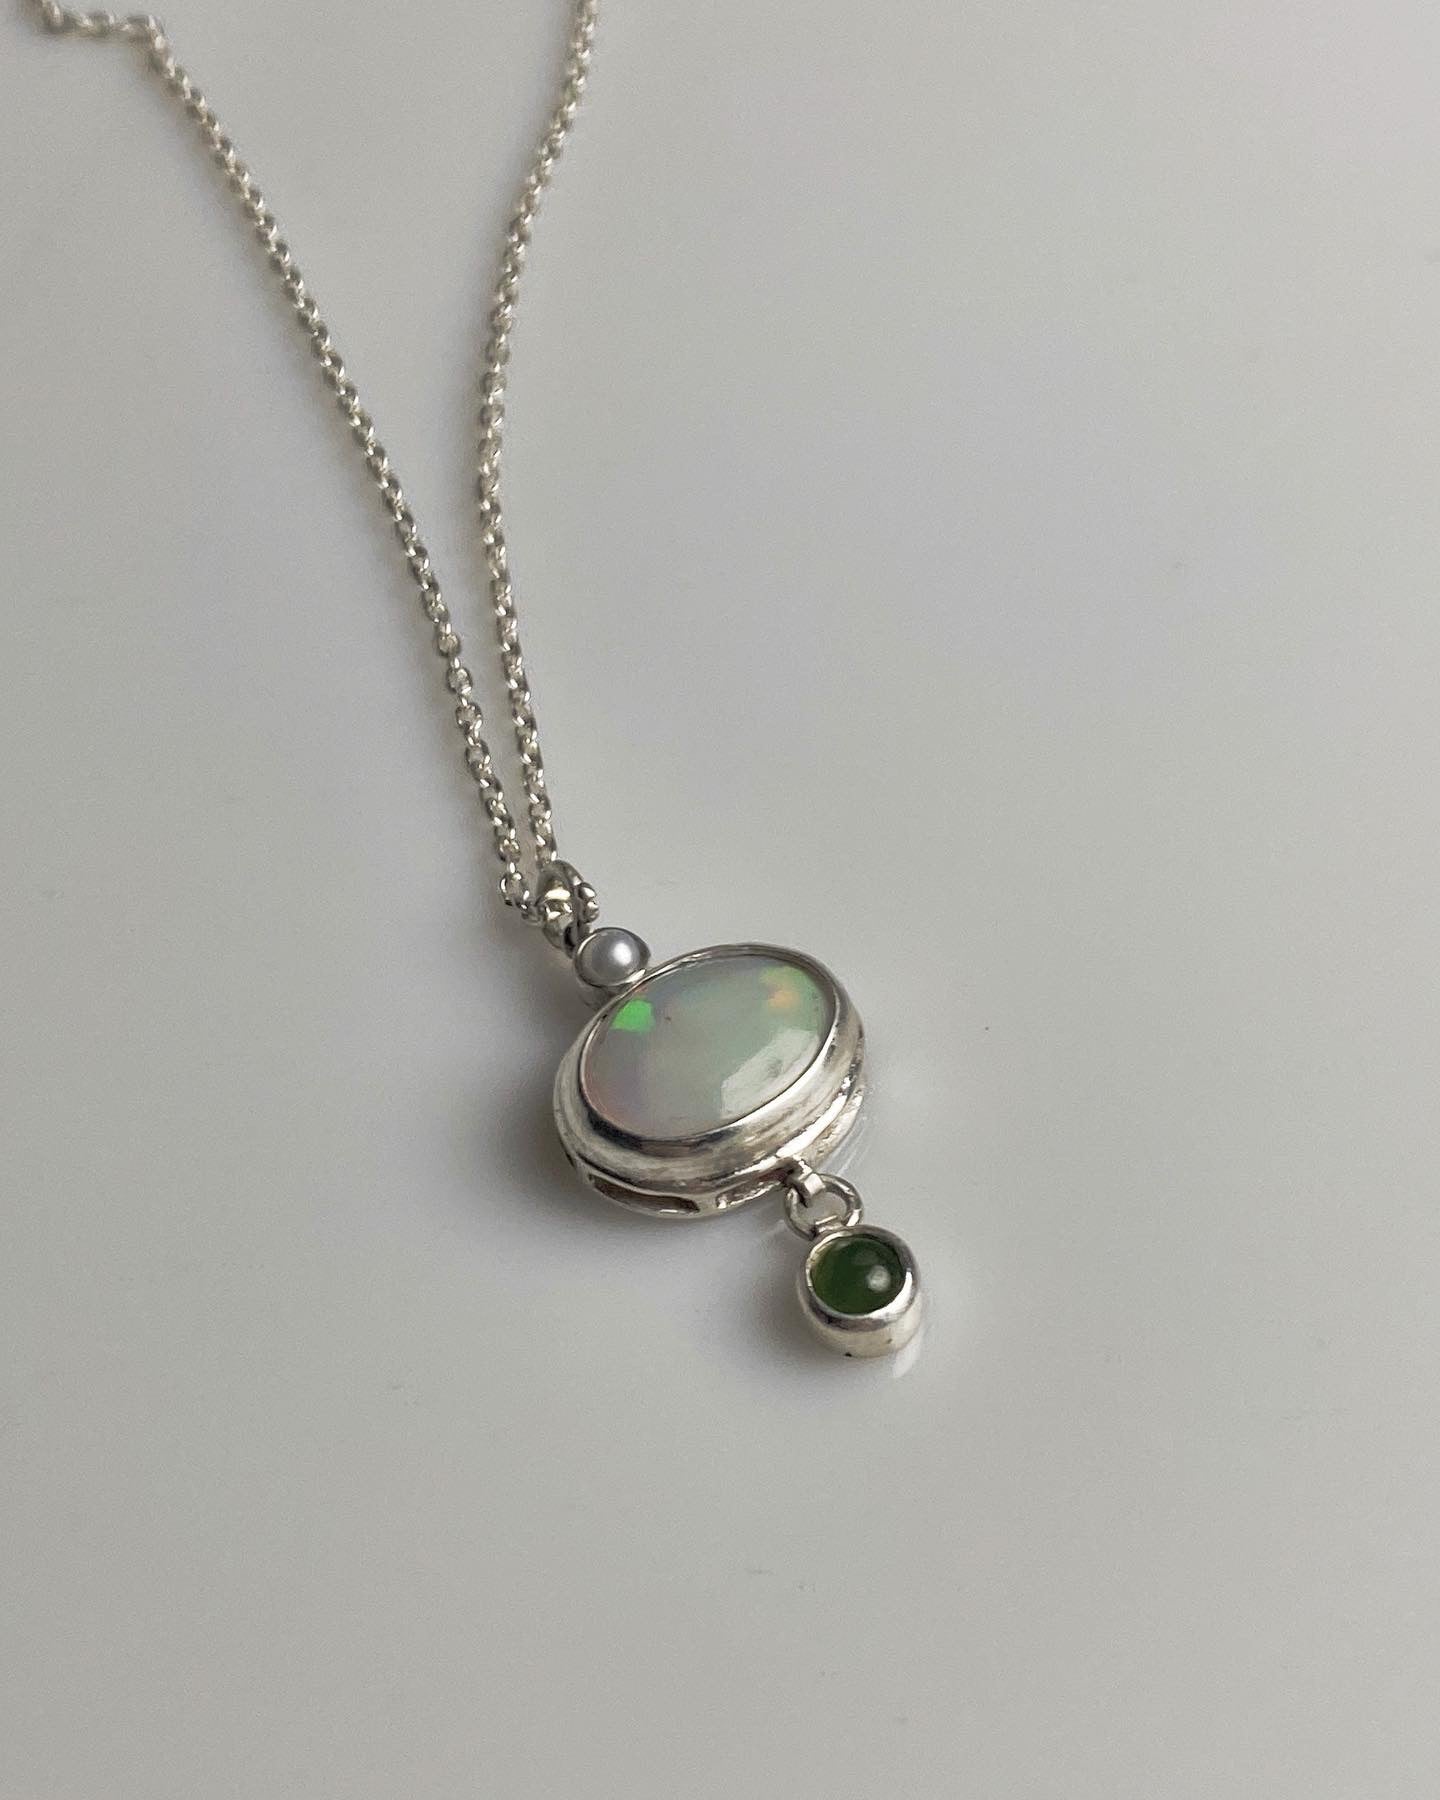 Opal pendant with a small pearl and a jade charm